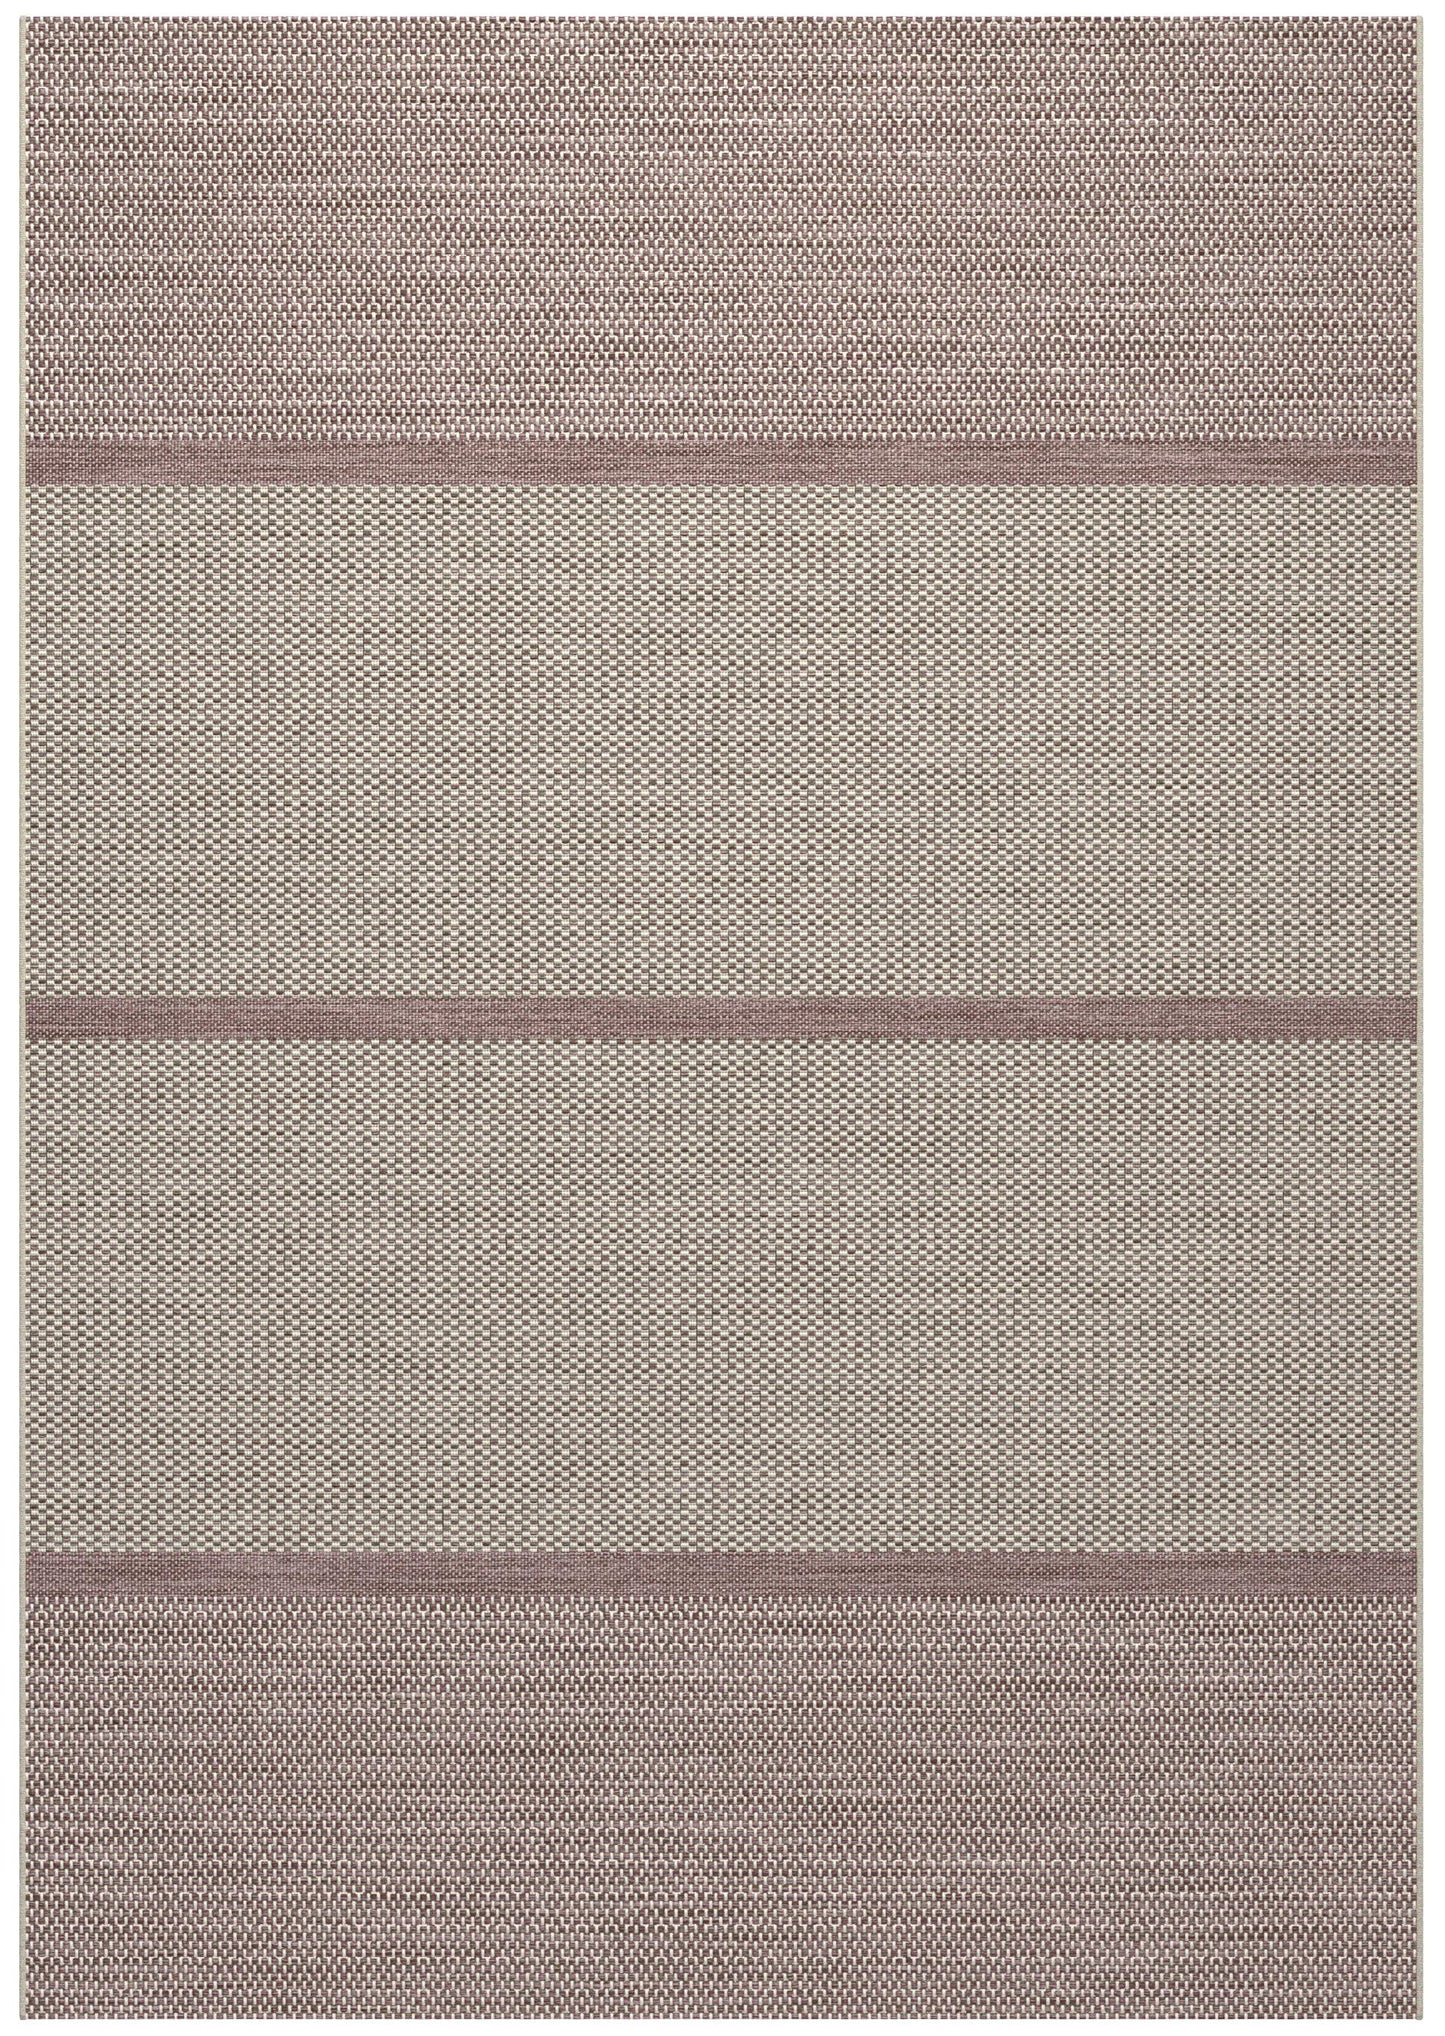 8X10 Area Rug, Striped White and Plum Indoor / Outdoor Polypropylene